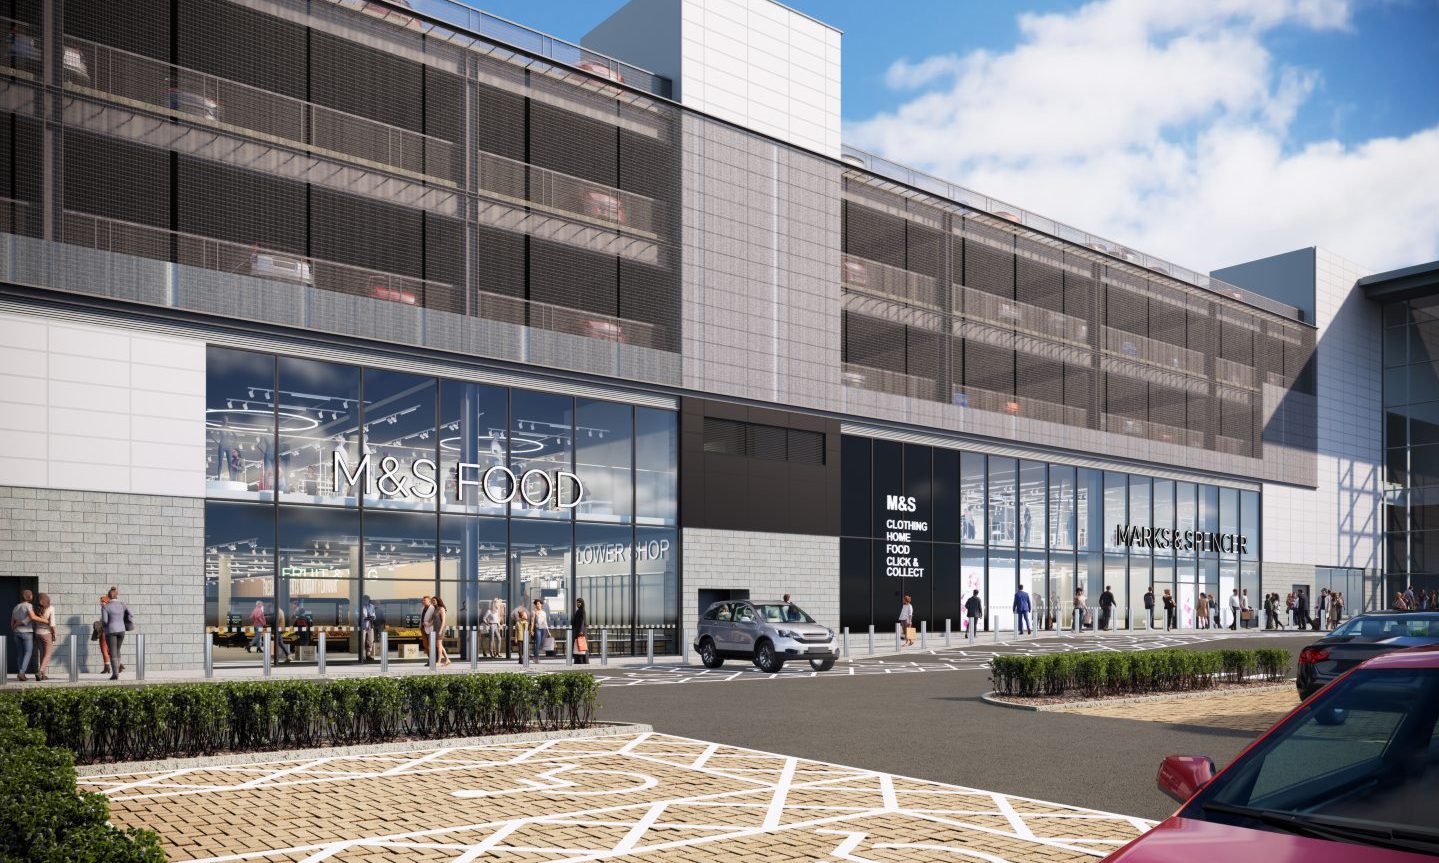 An impression of the new expansion planned for Aberdeen's Union Square M&S branch after the Union Street closure